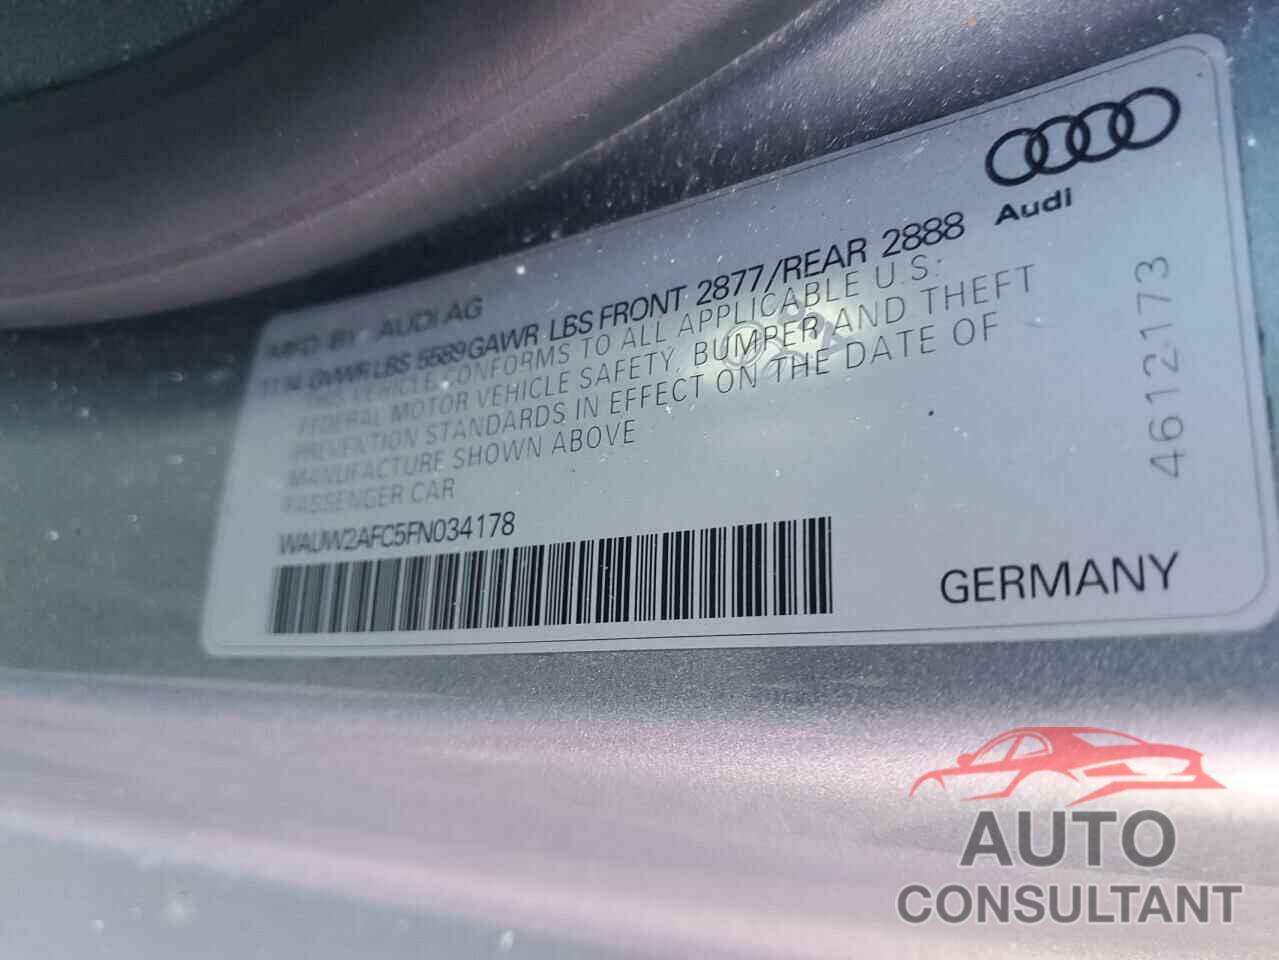 AUDI S7/RS7 2015 - WAUW2AFC5FN034178